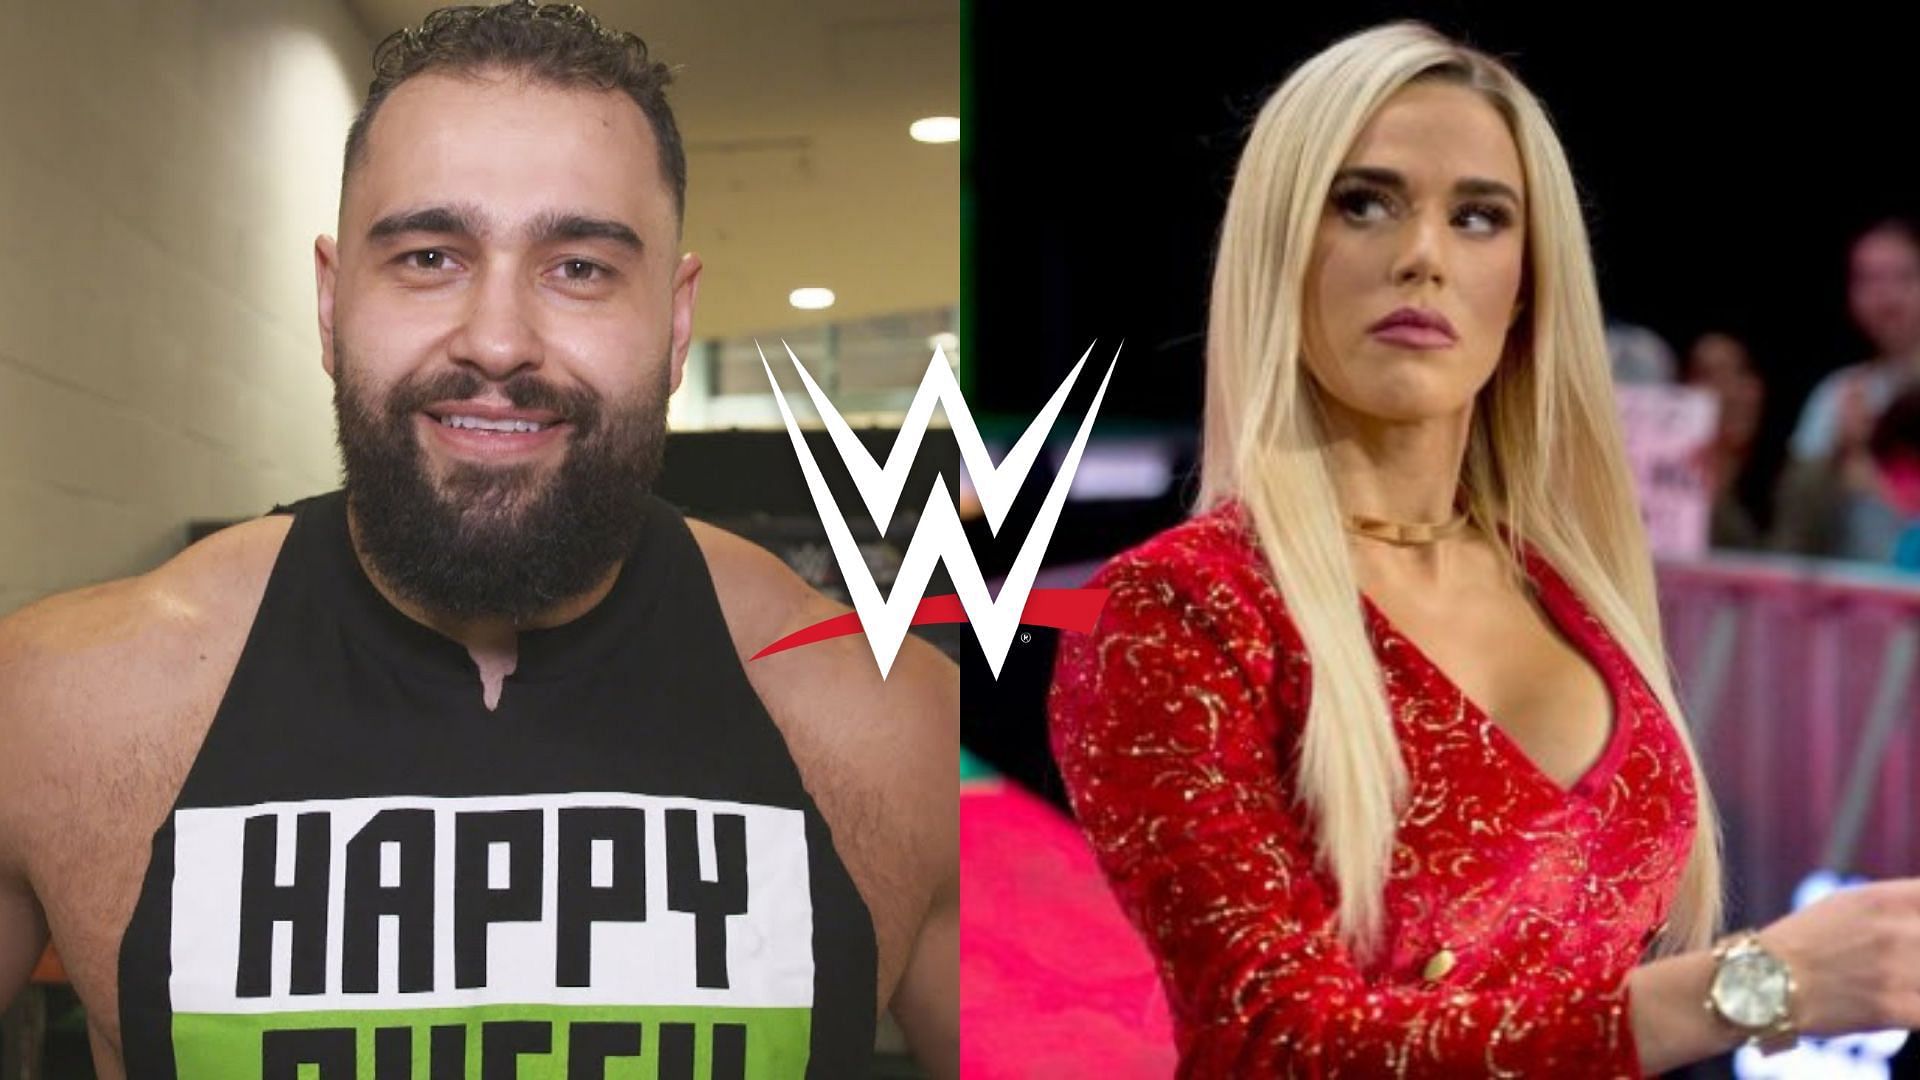 Miro and Lana are real-life partners who met in WWE